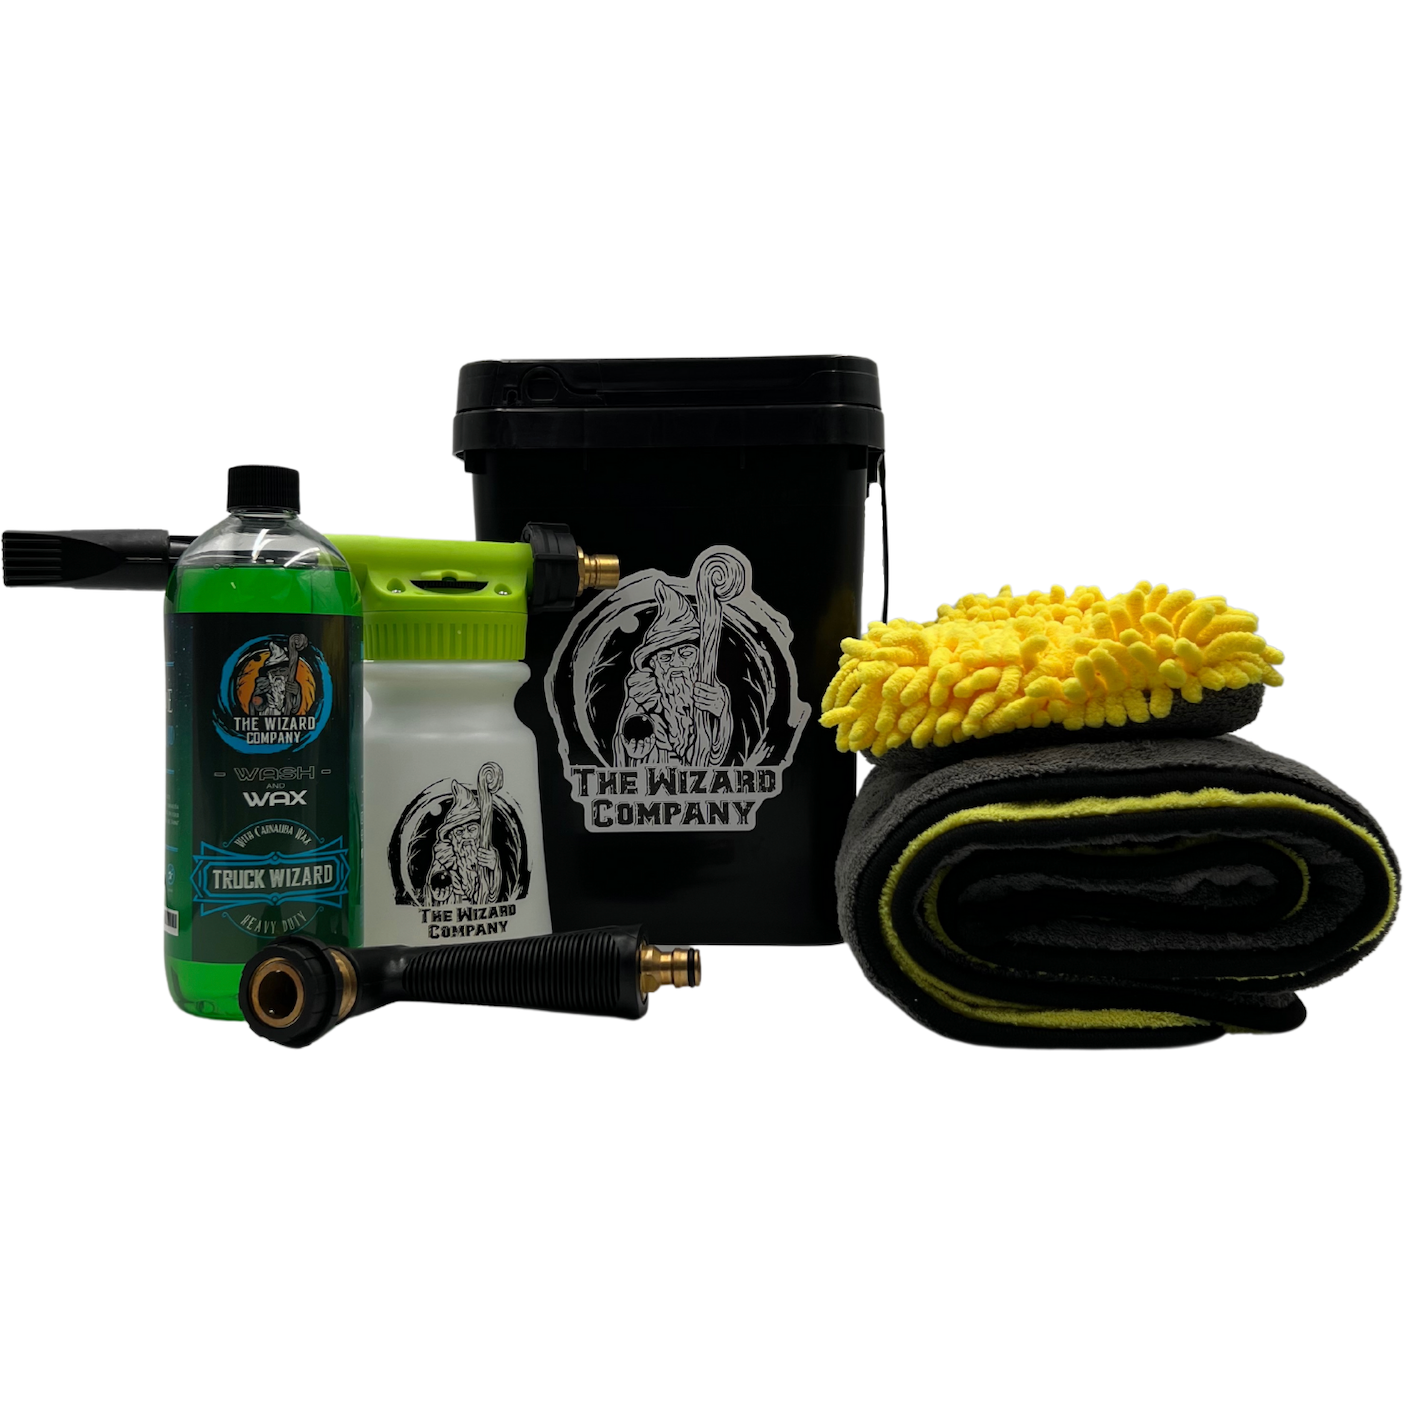 Truck Wizard Complete Kit (Garden Hose) – The Wizard Company